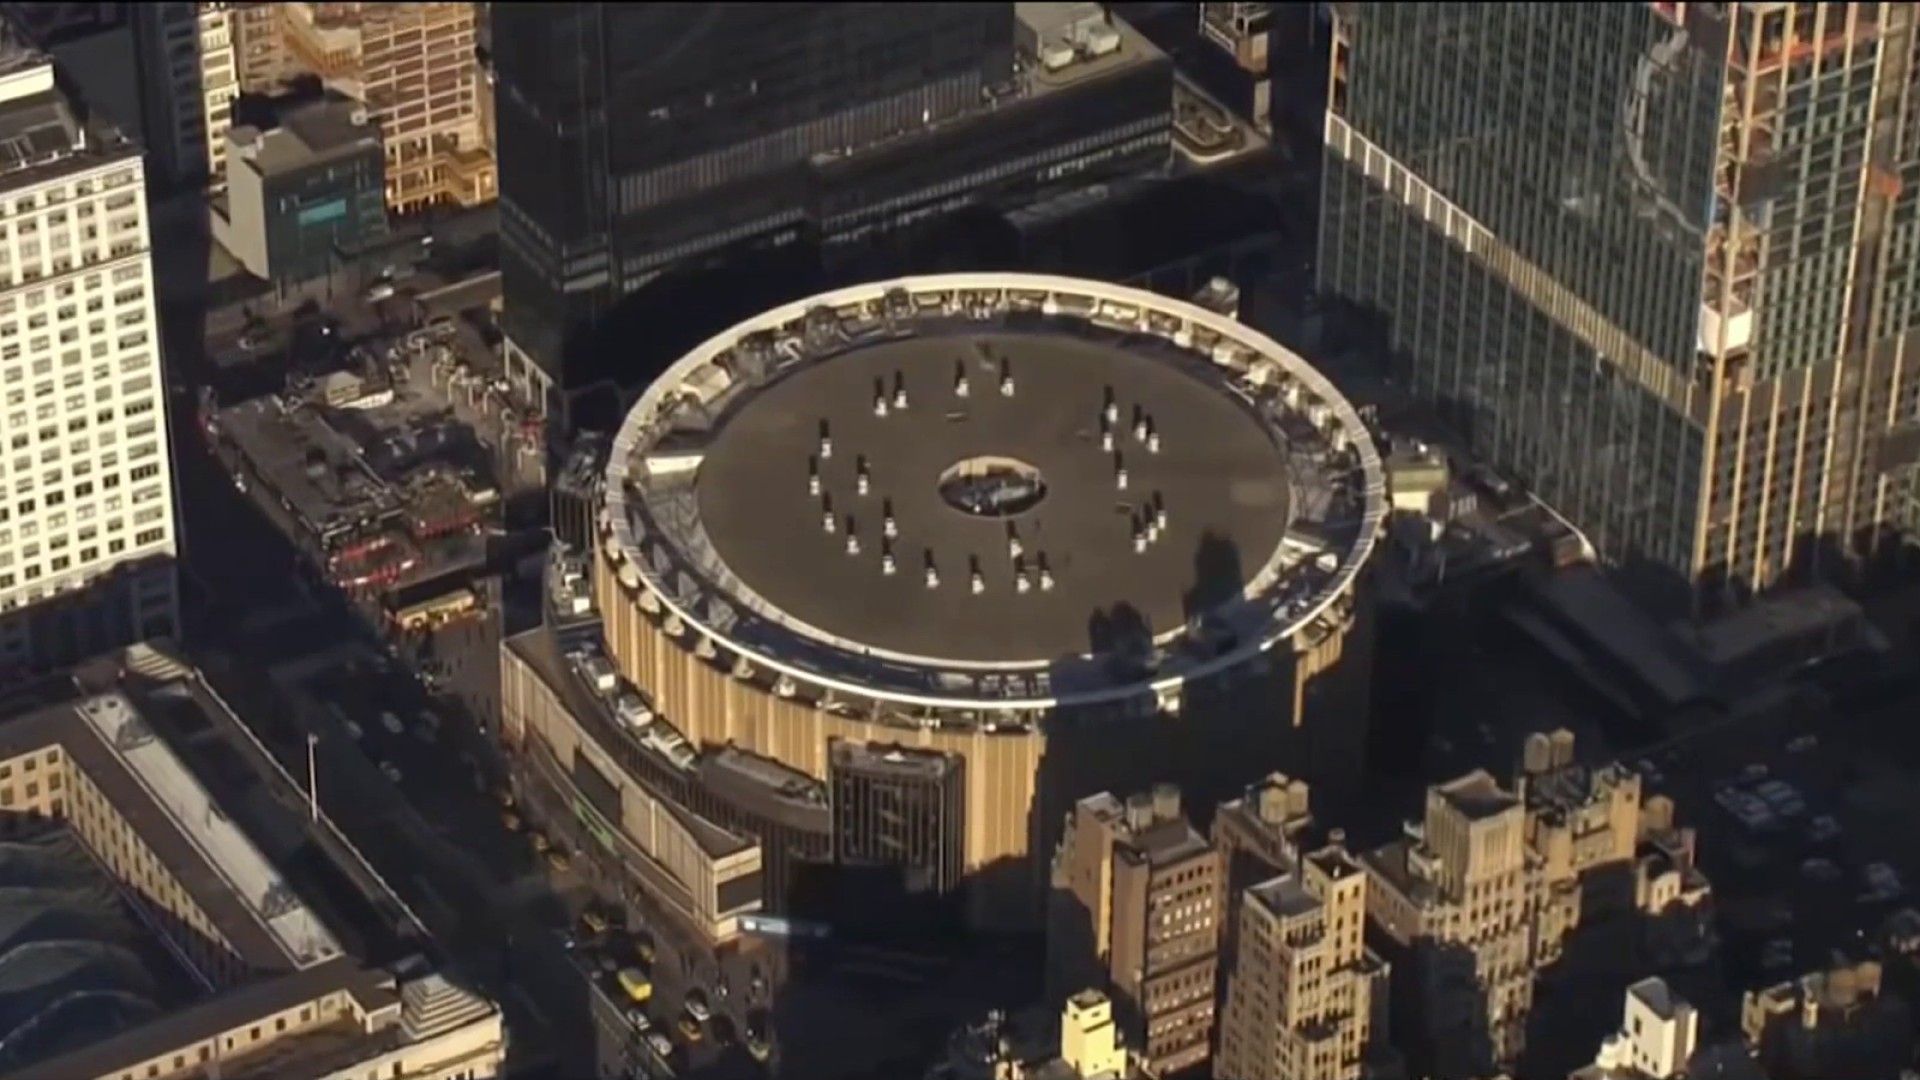 New York Planning Commission Votes To Keep Madison Square Garden in Place